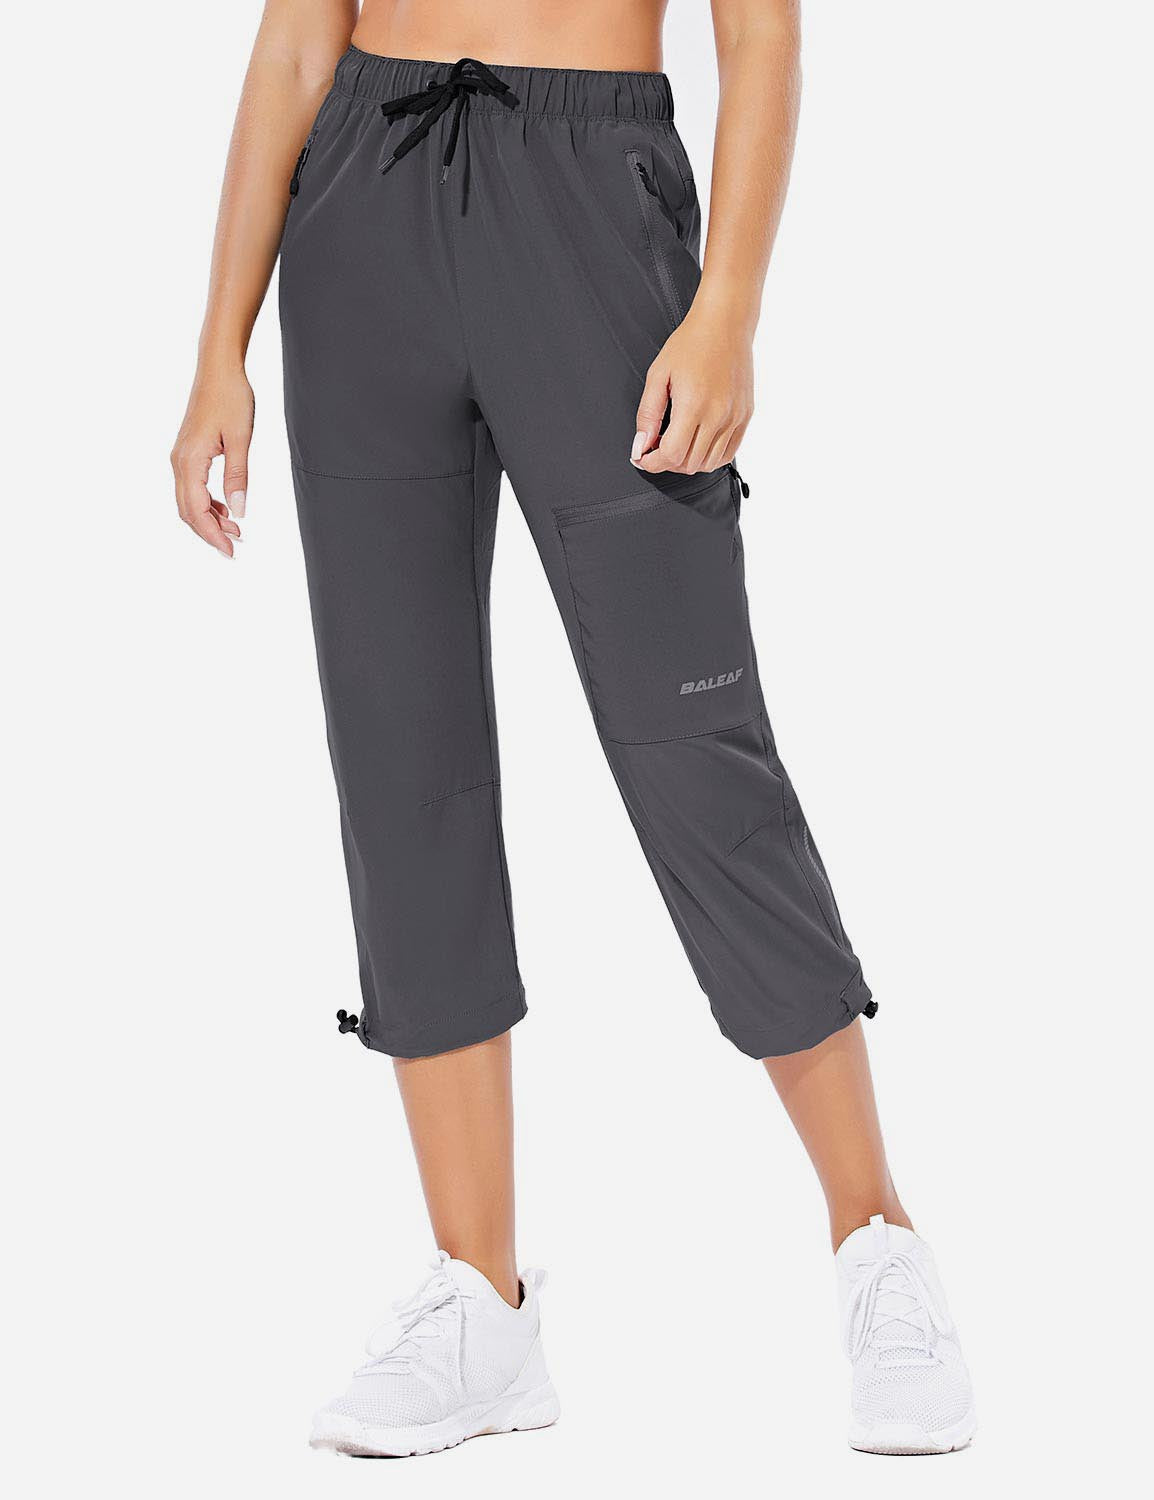 Baleaf Outdoor Athletic Pants for Women